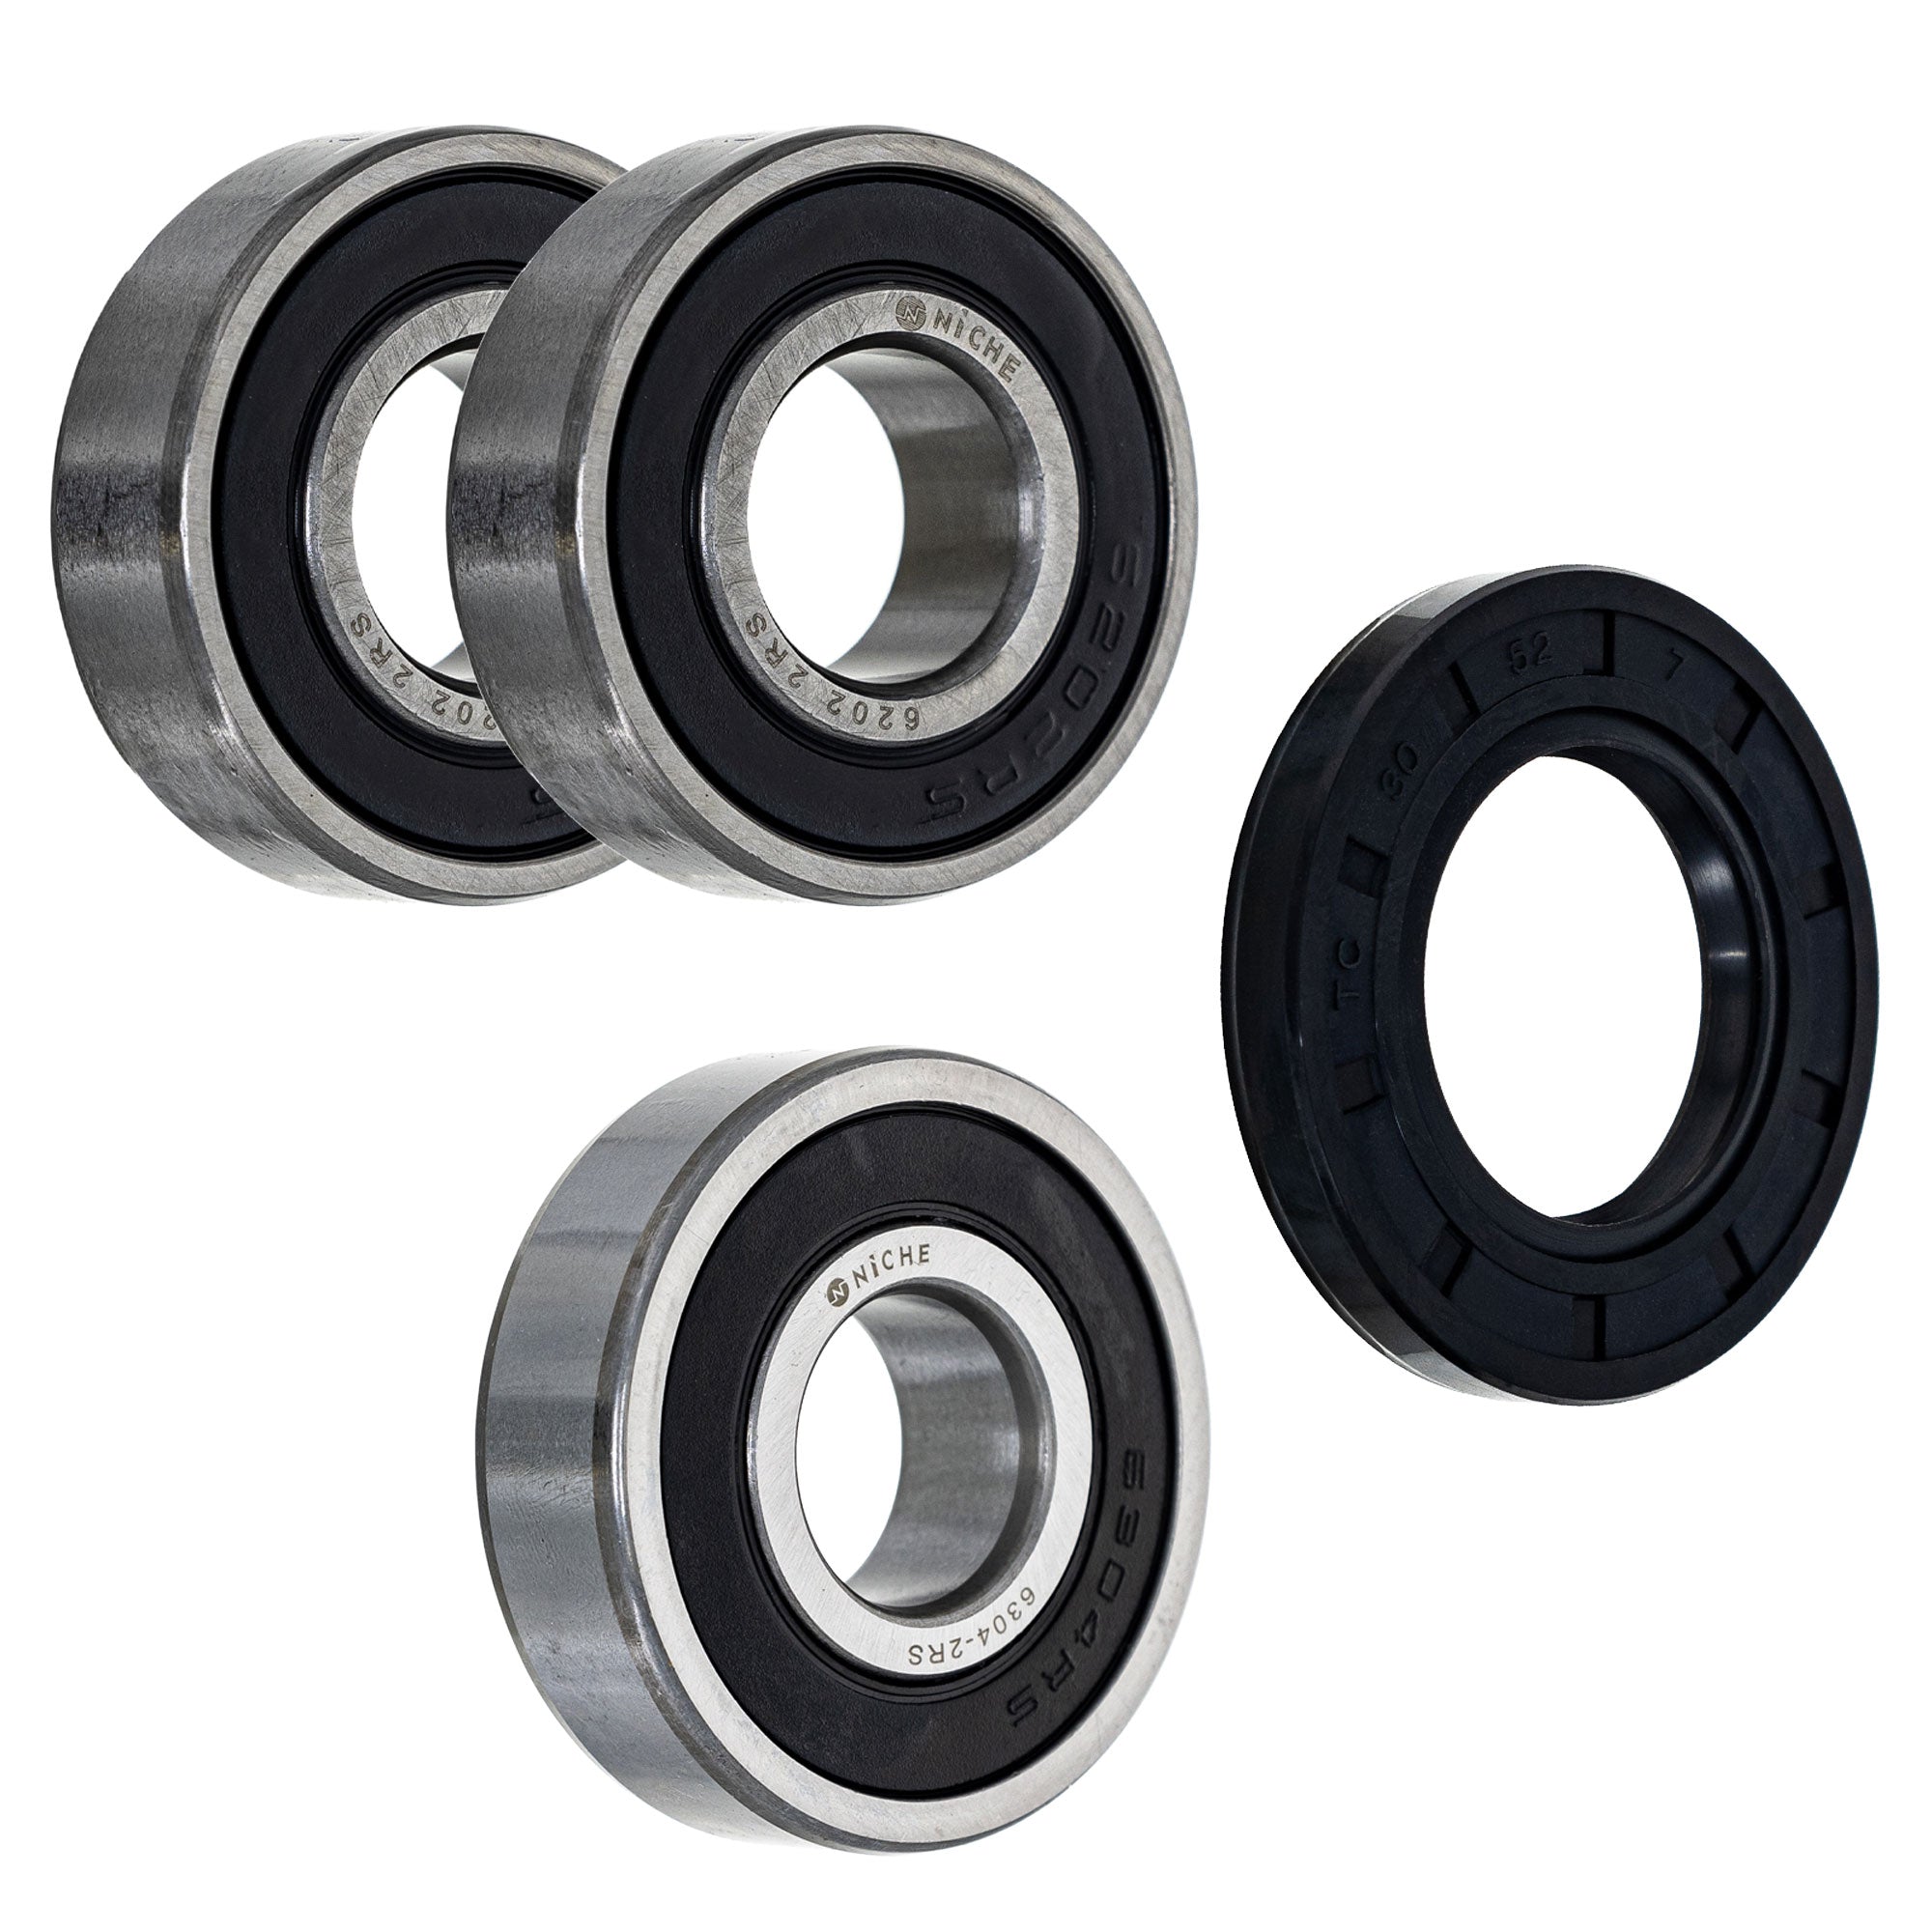 Wheel Bearing Seal Kit for zOTHER Ref No Virago V Route NICHE MK1009016